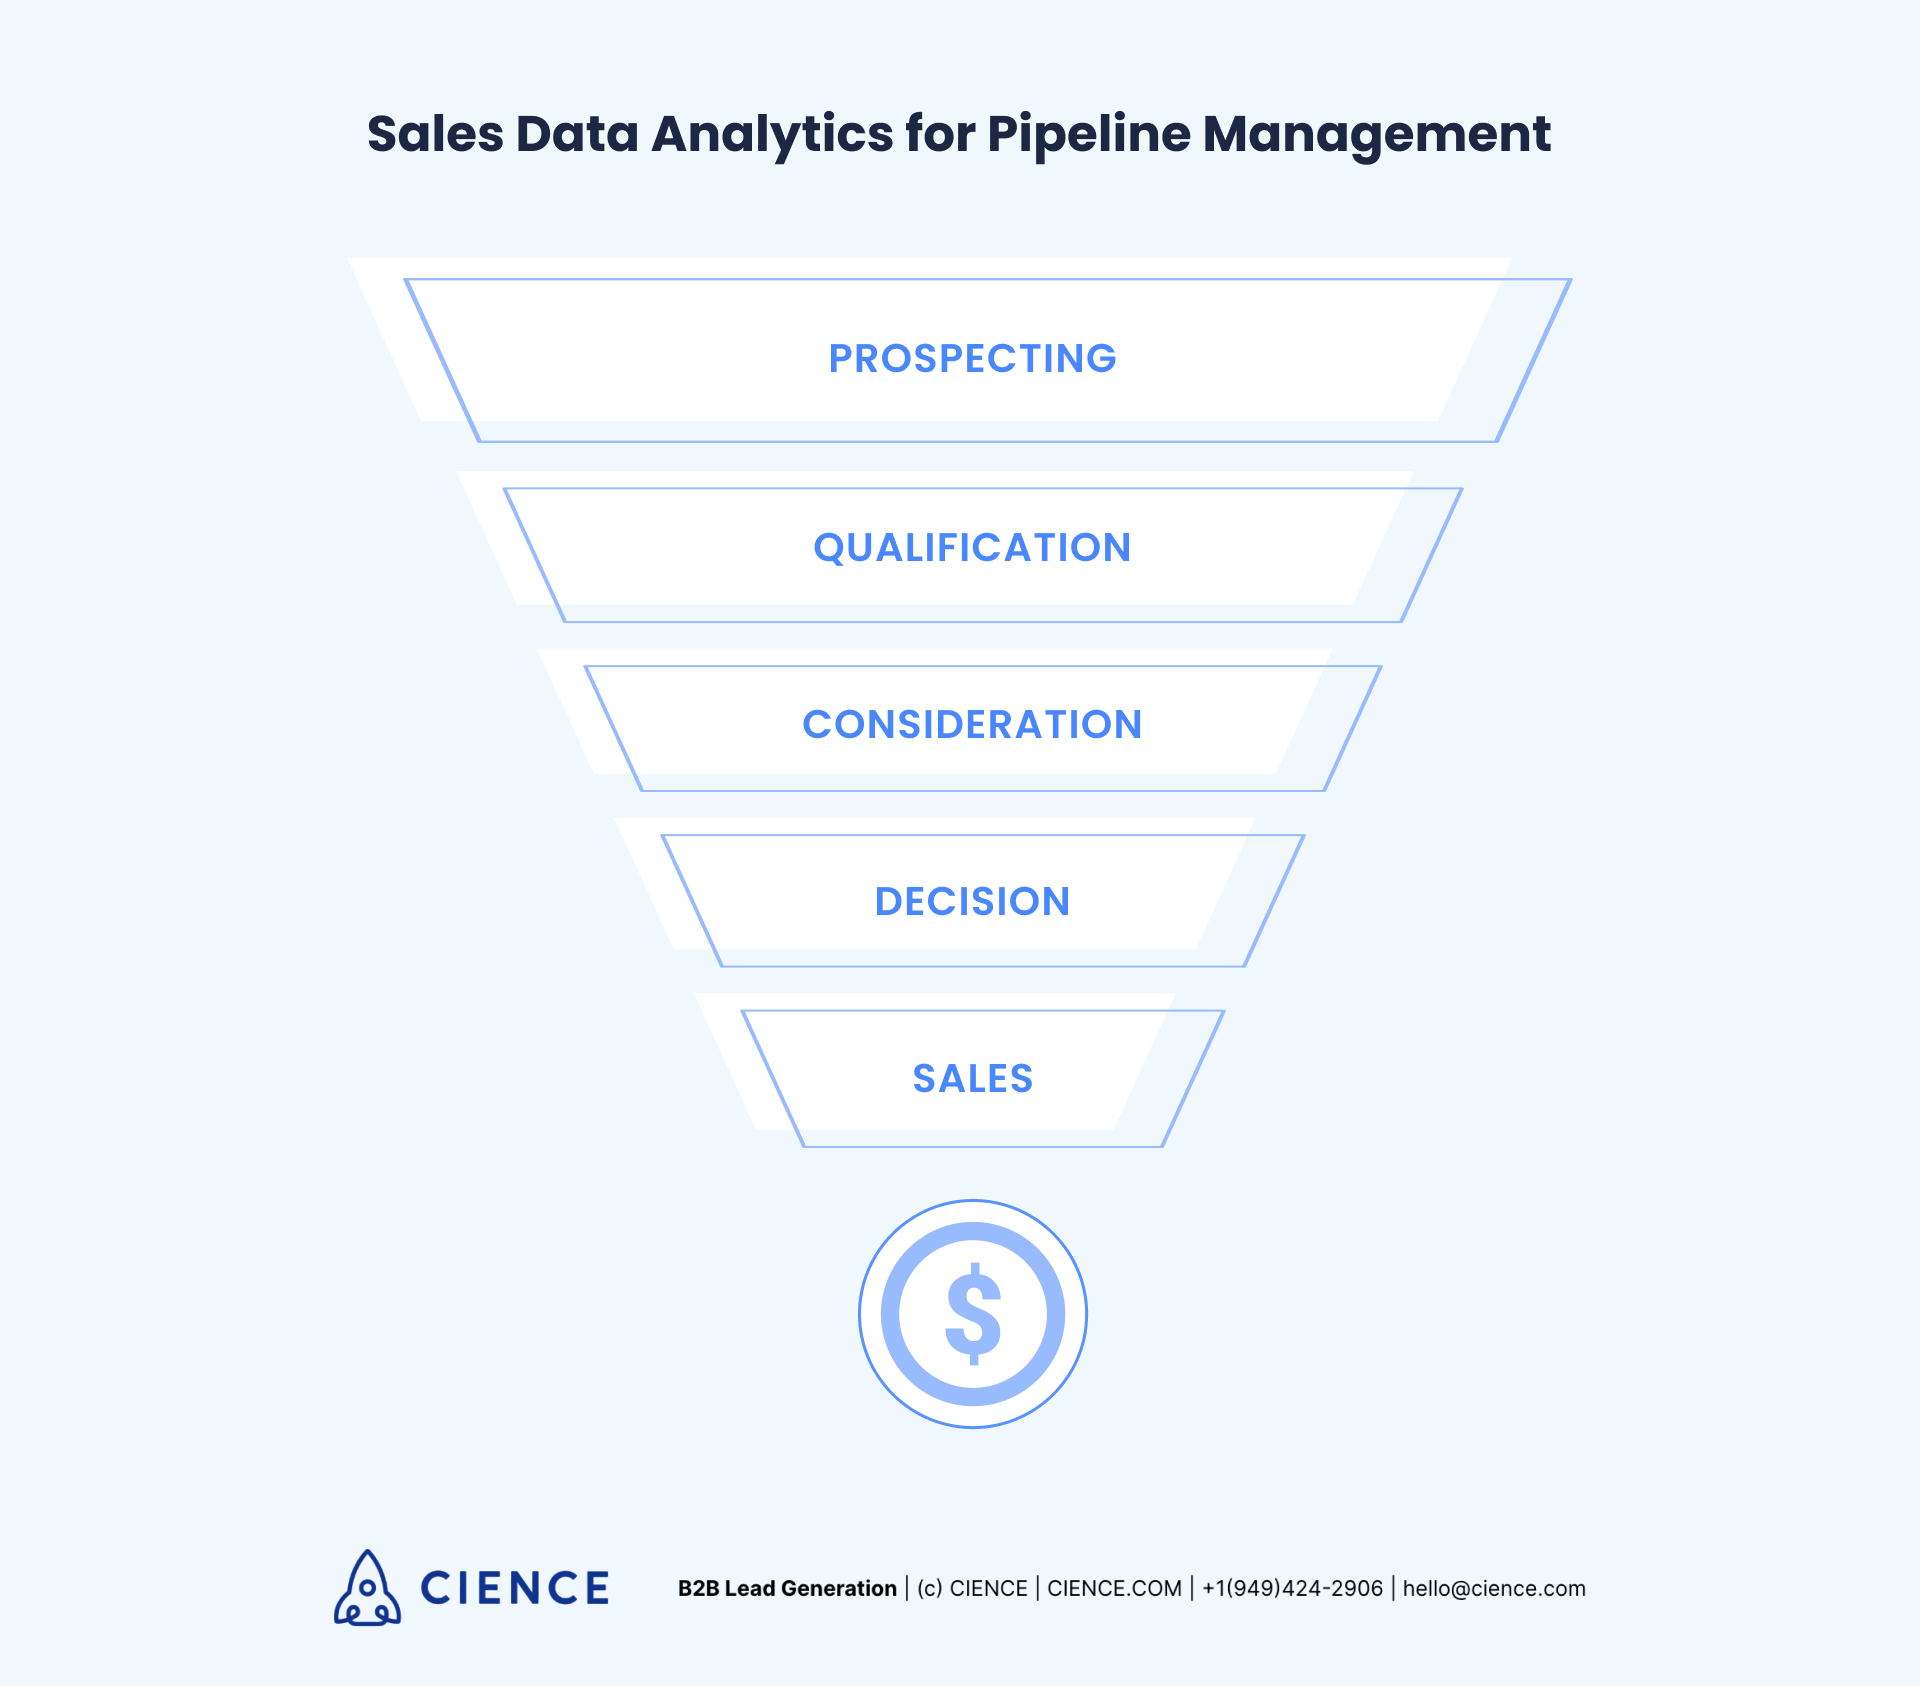 Sales data analytics for pipeline management: stages